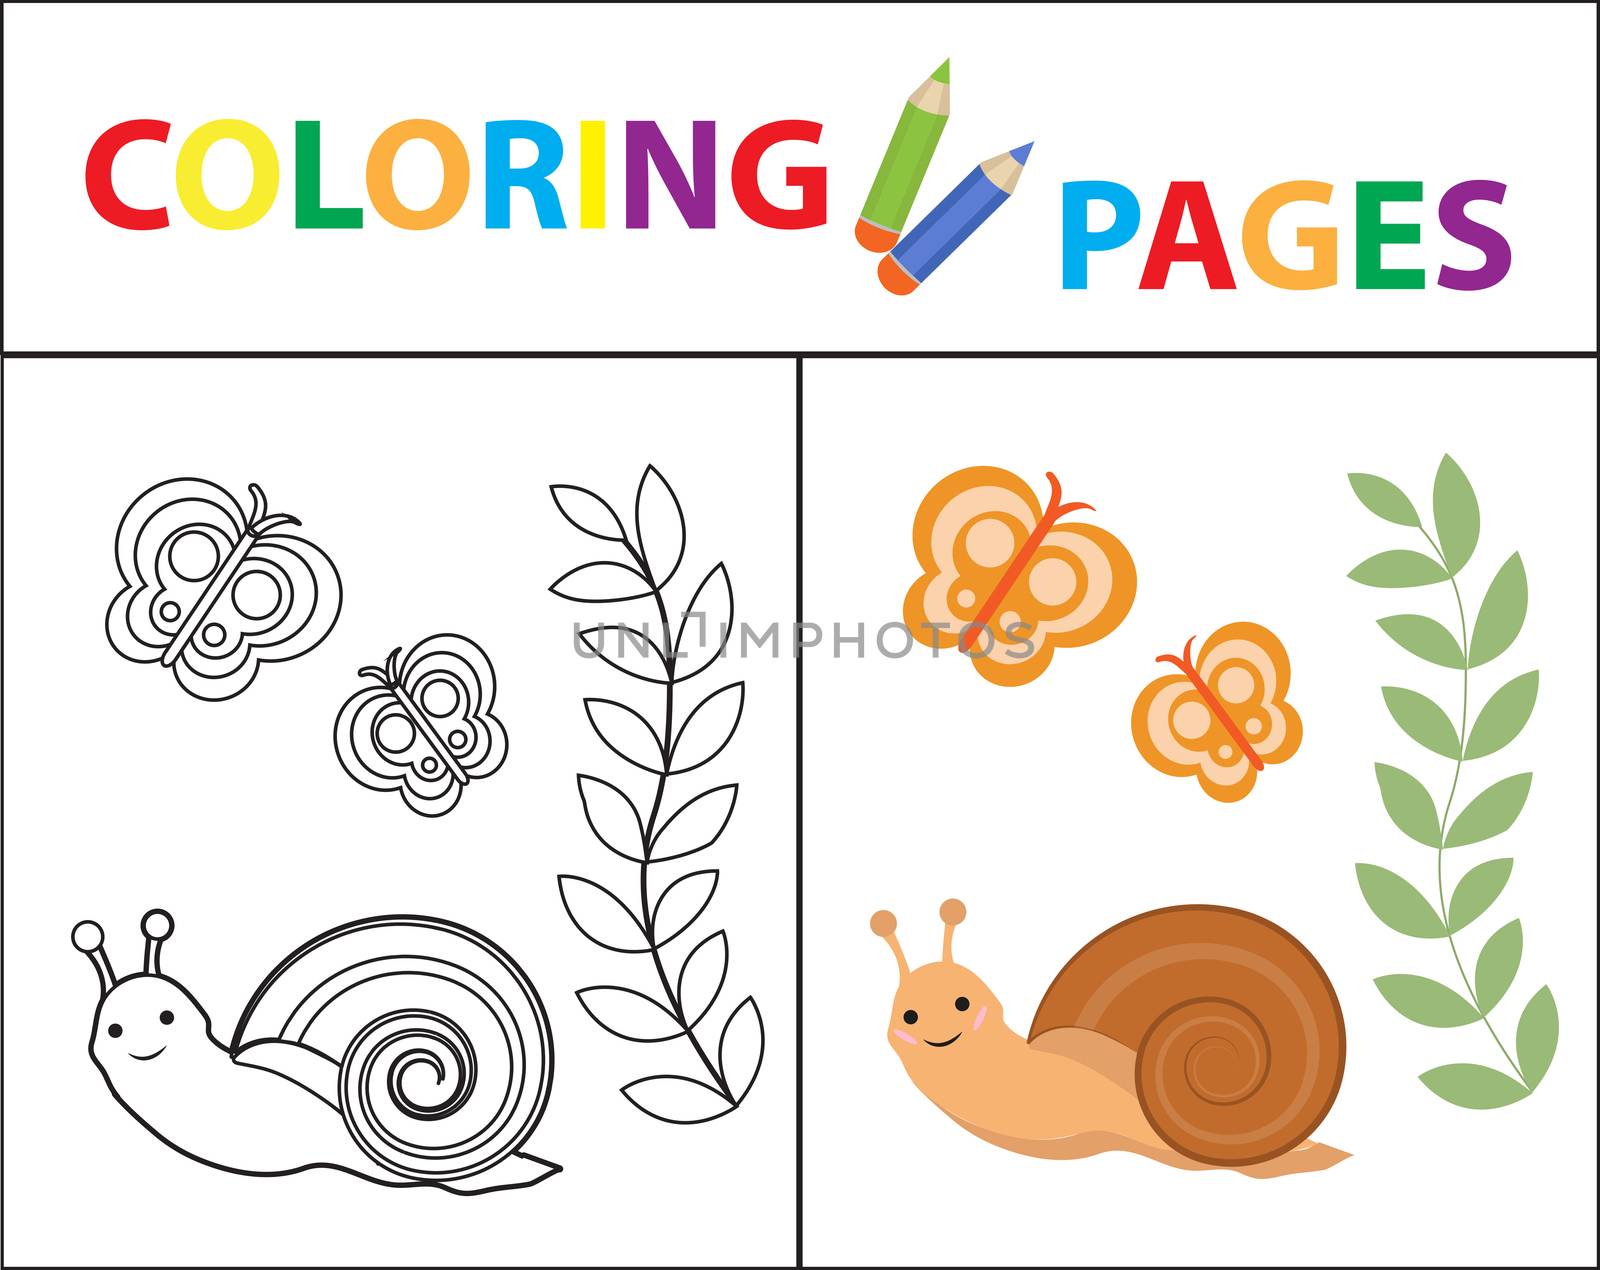 Coloring book page for kids. Snail plant and butterfly. Sketch outline and color version. Childrens education. illustration